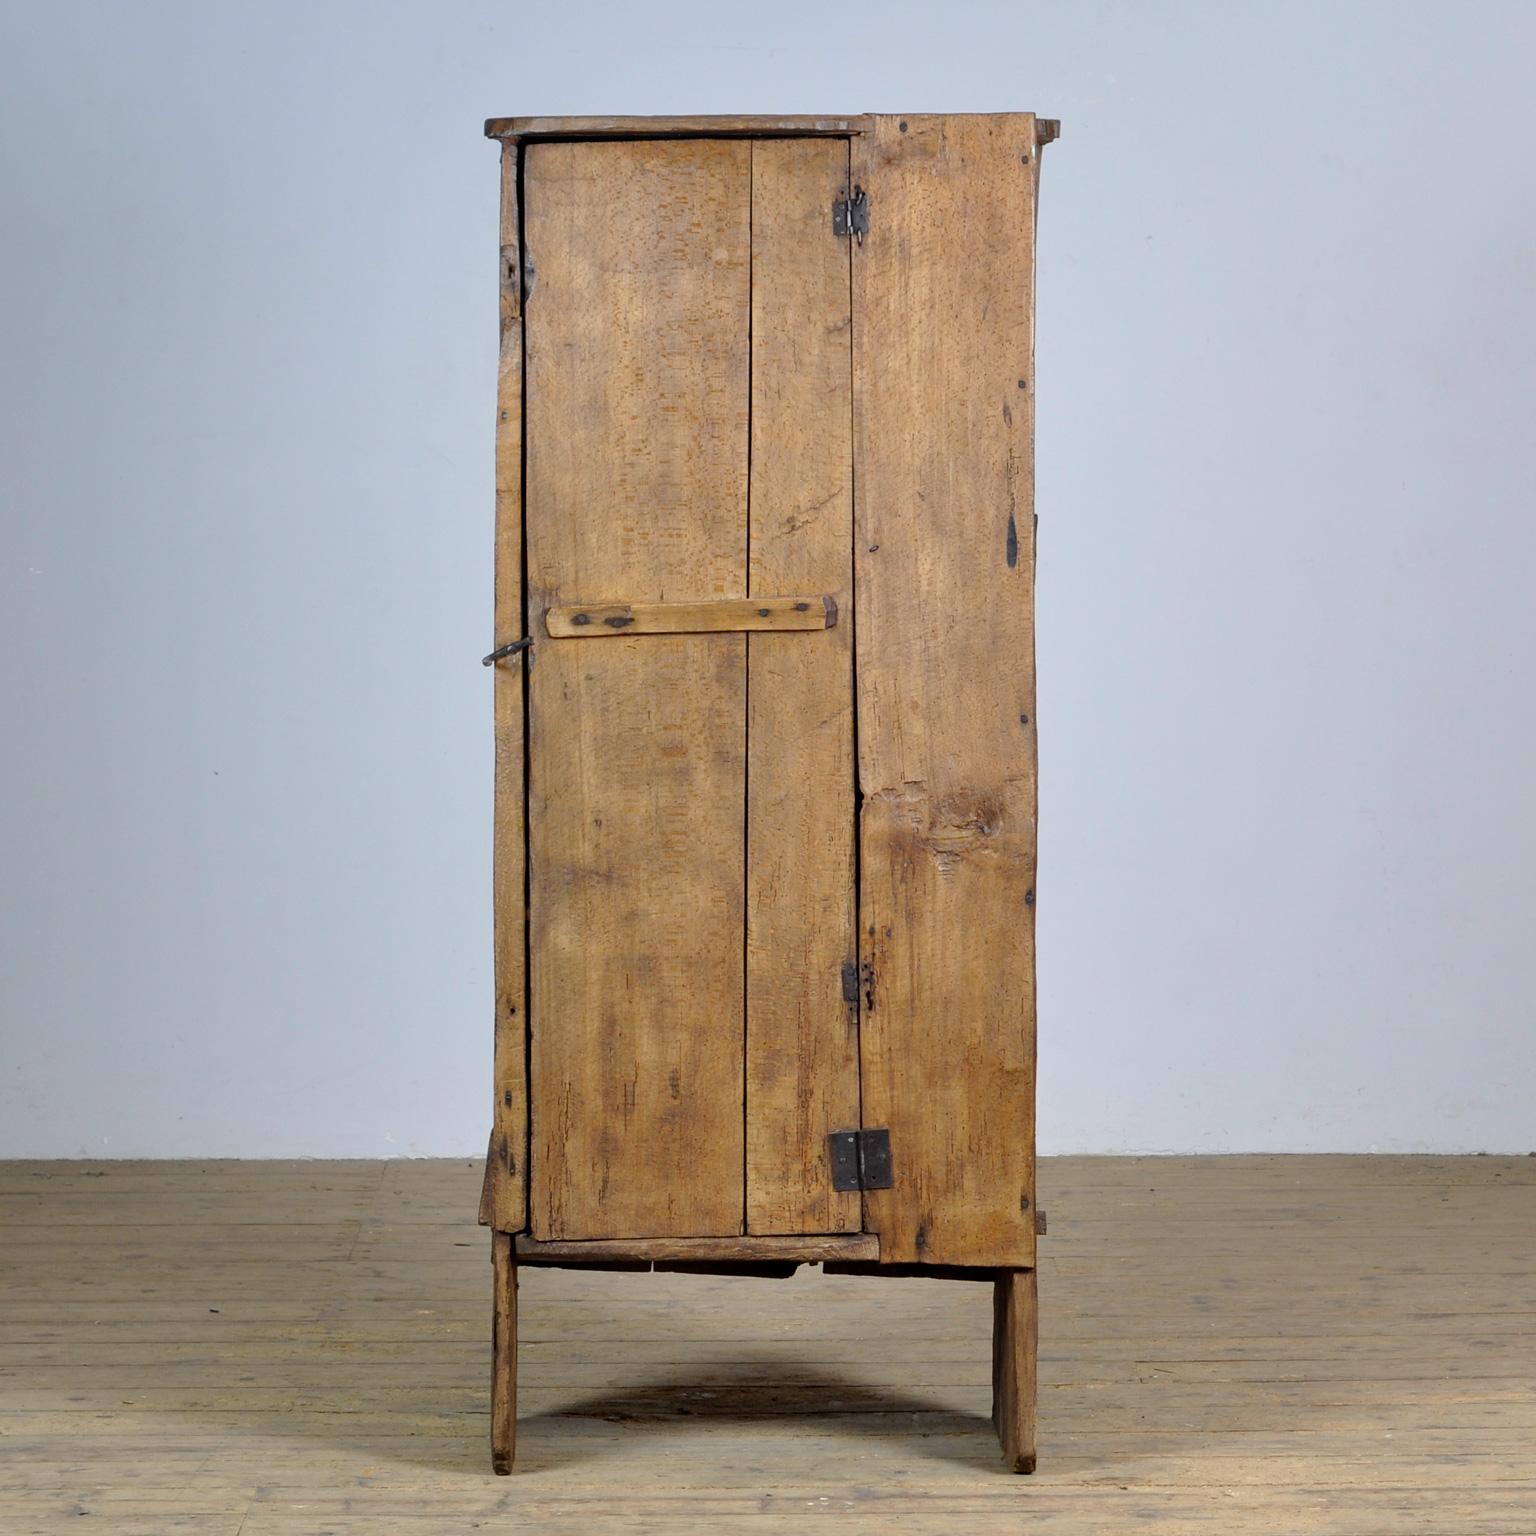 Rare primitive cupboard, Carpathians, 18th century, early construction, constructed from sawn or hewn beech wood. Two shelves on the inside. This is a cupboard from a very modest home in the highlands. It's a small miracle that this cupboard has